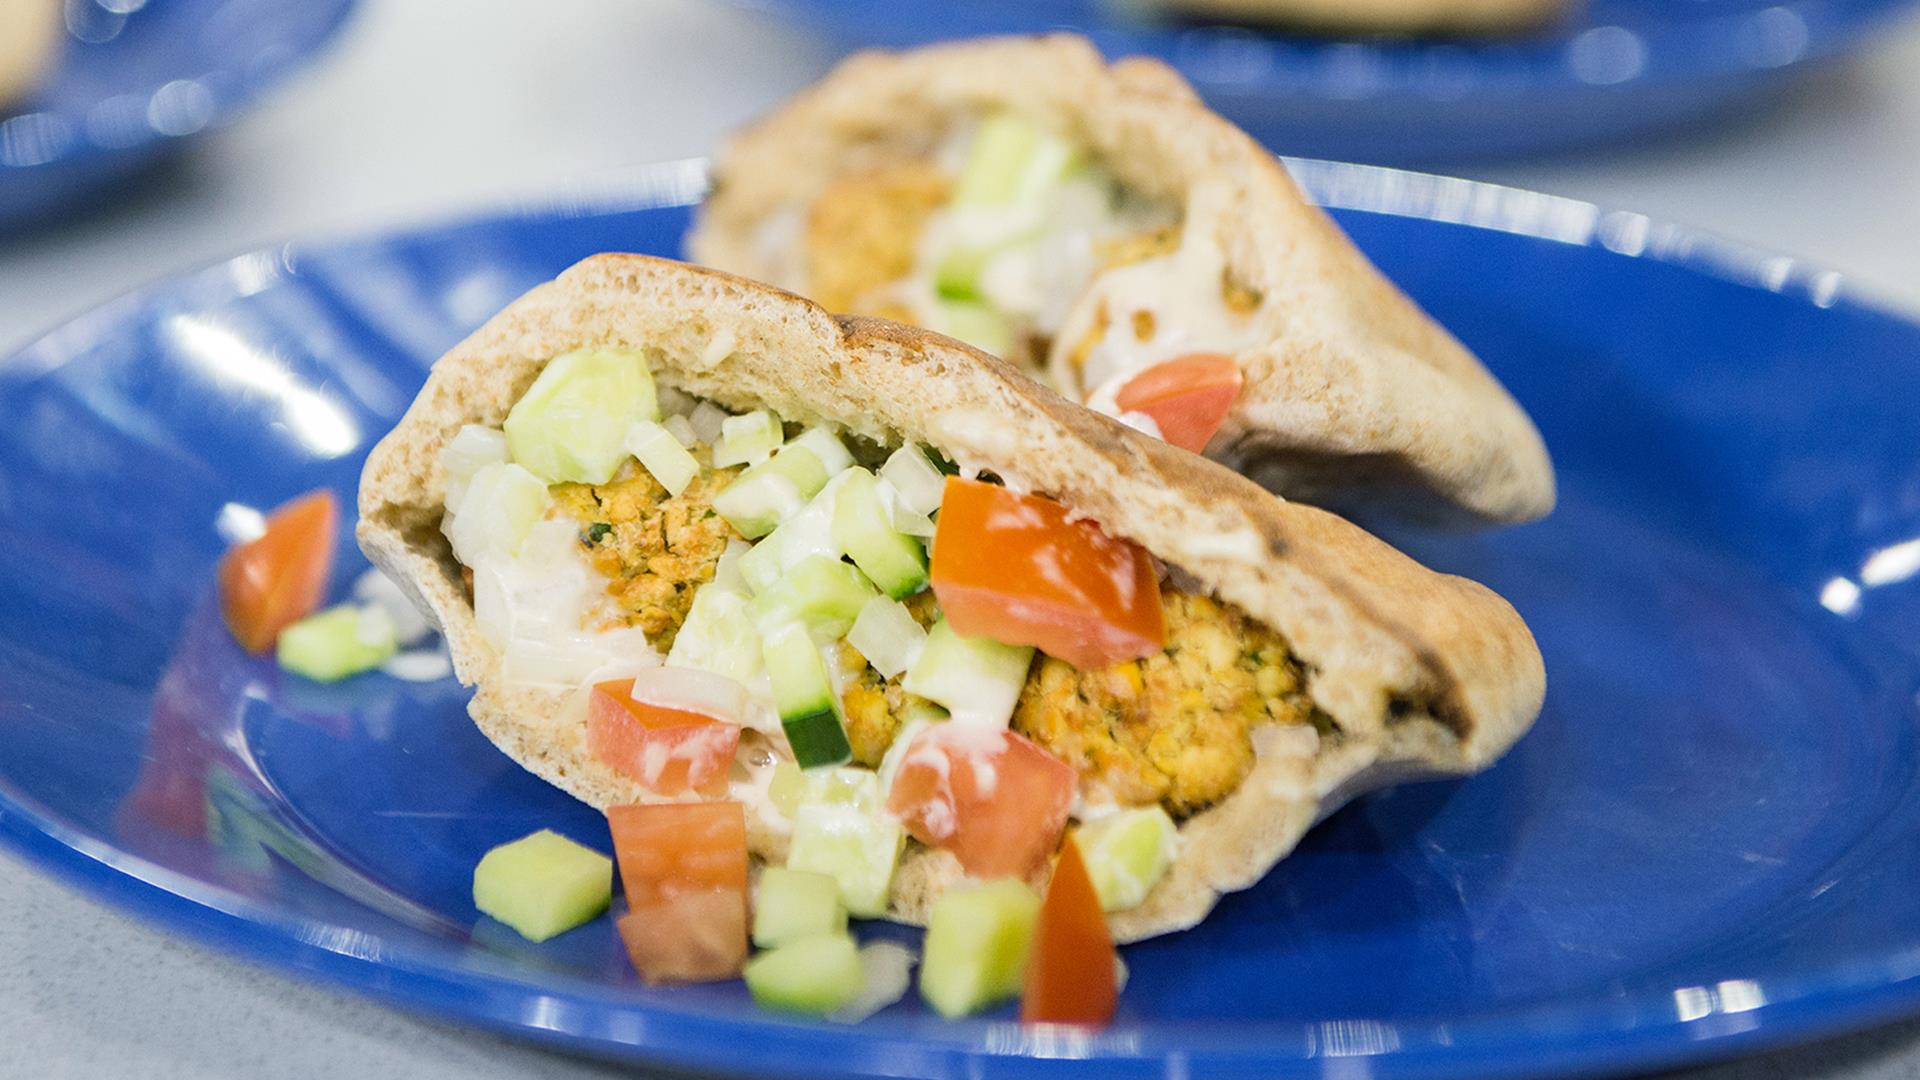 Learn to make leaner versions of falafel and baklava from Joy Bauer